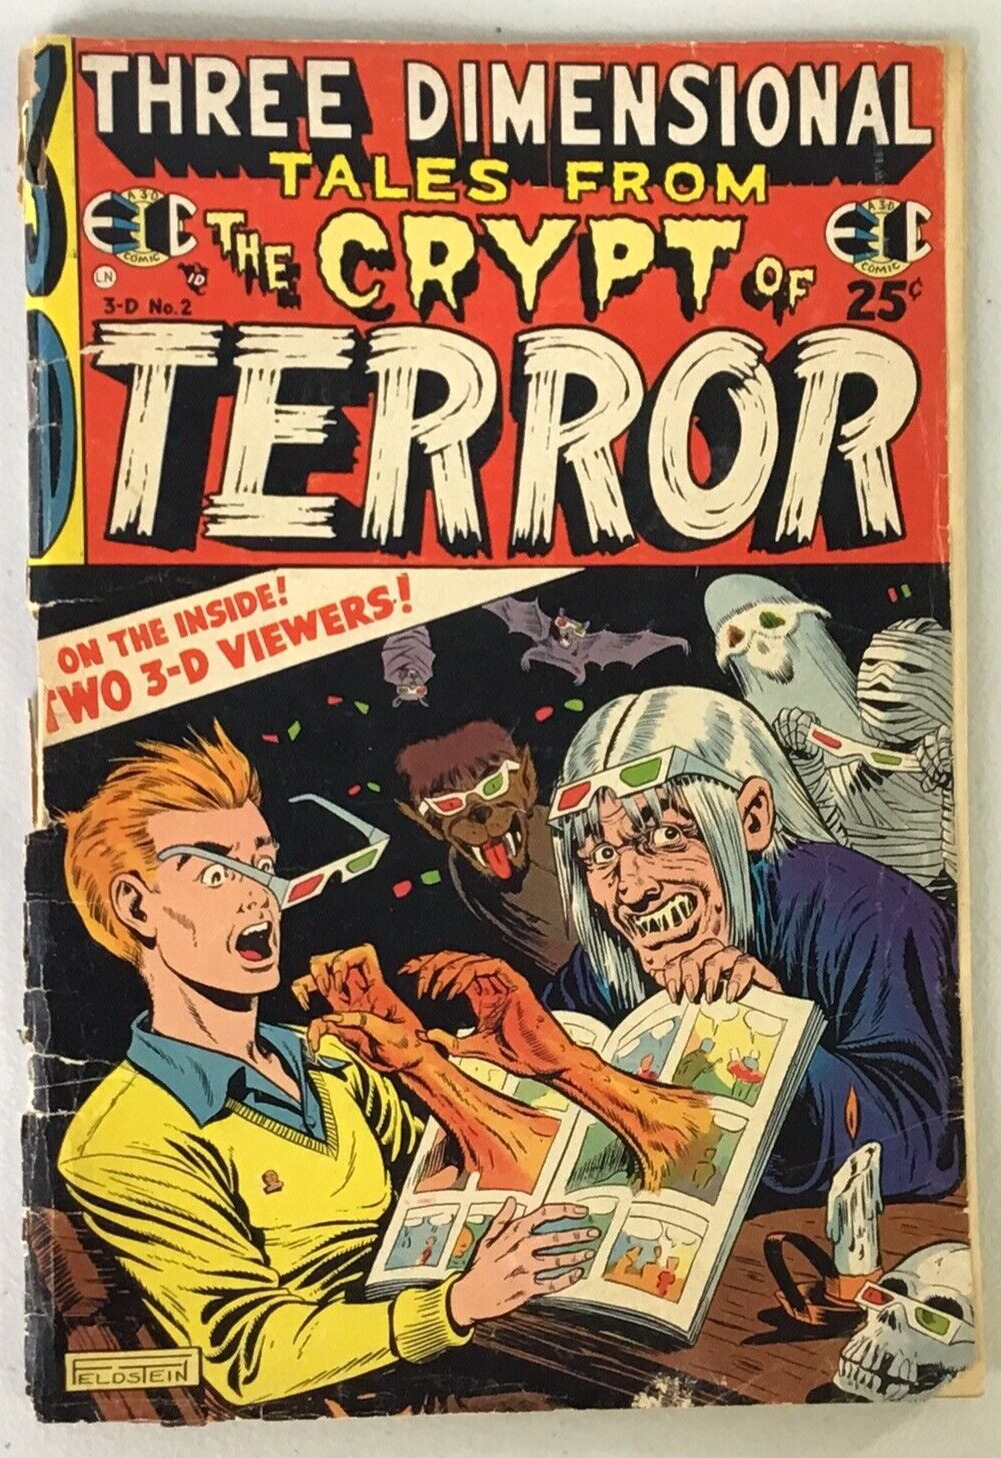 3-D Tales from the Crypt of Terror #2 EC Comics 1950 GD - 1.8